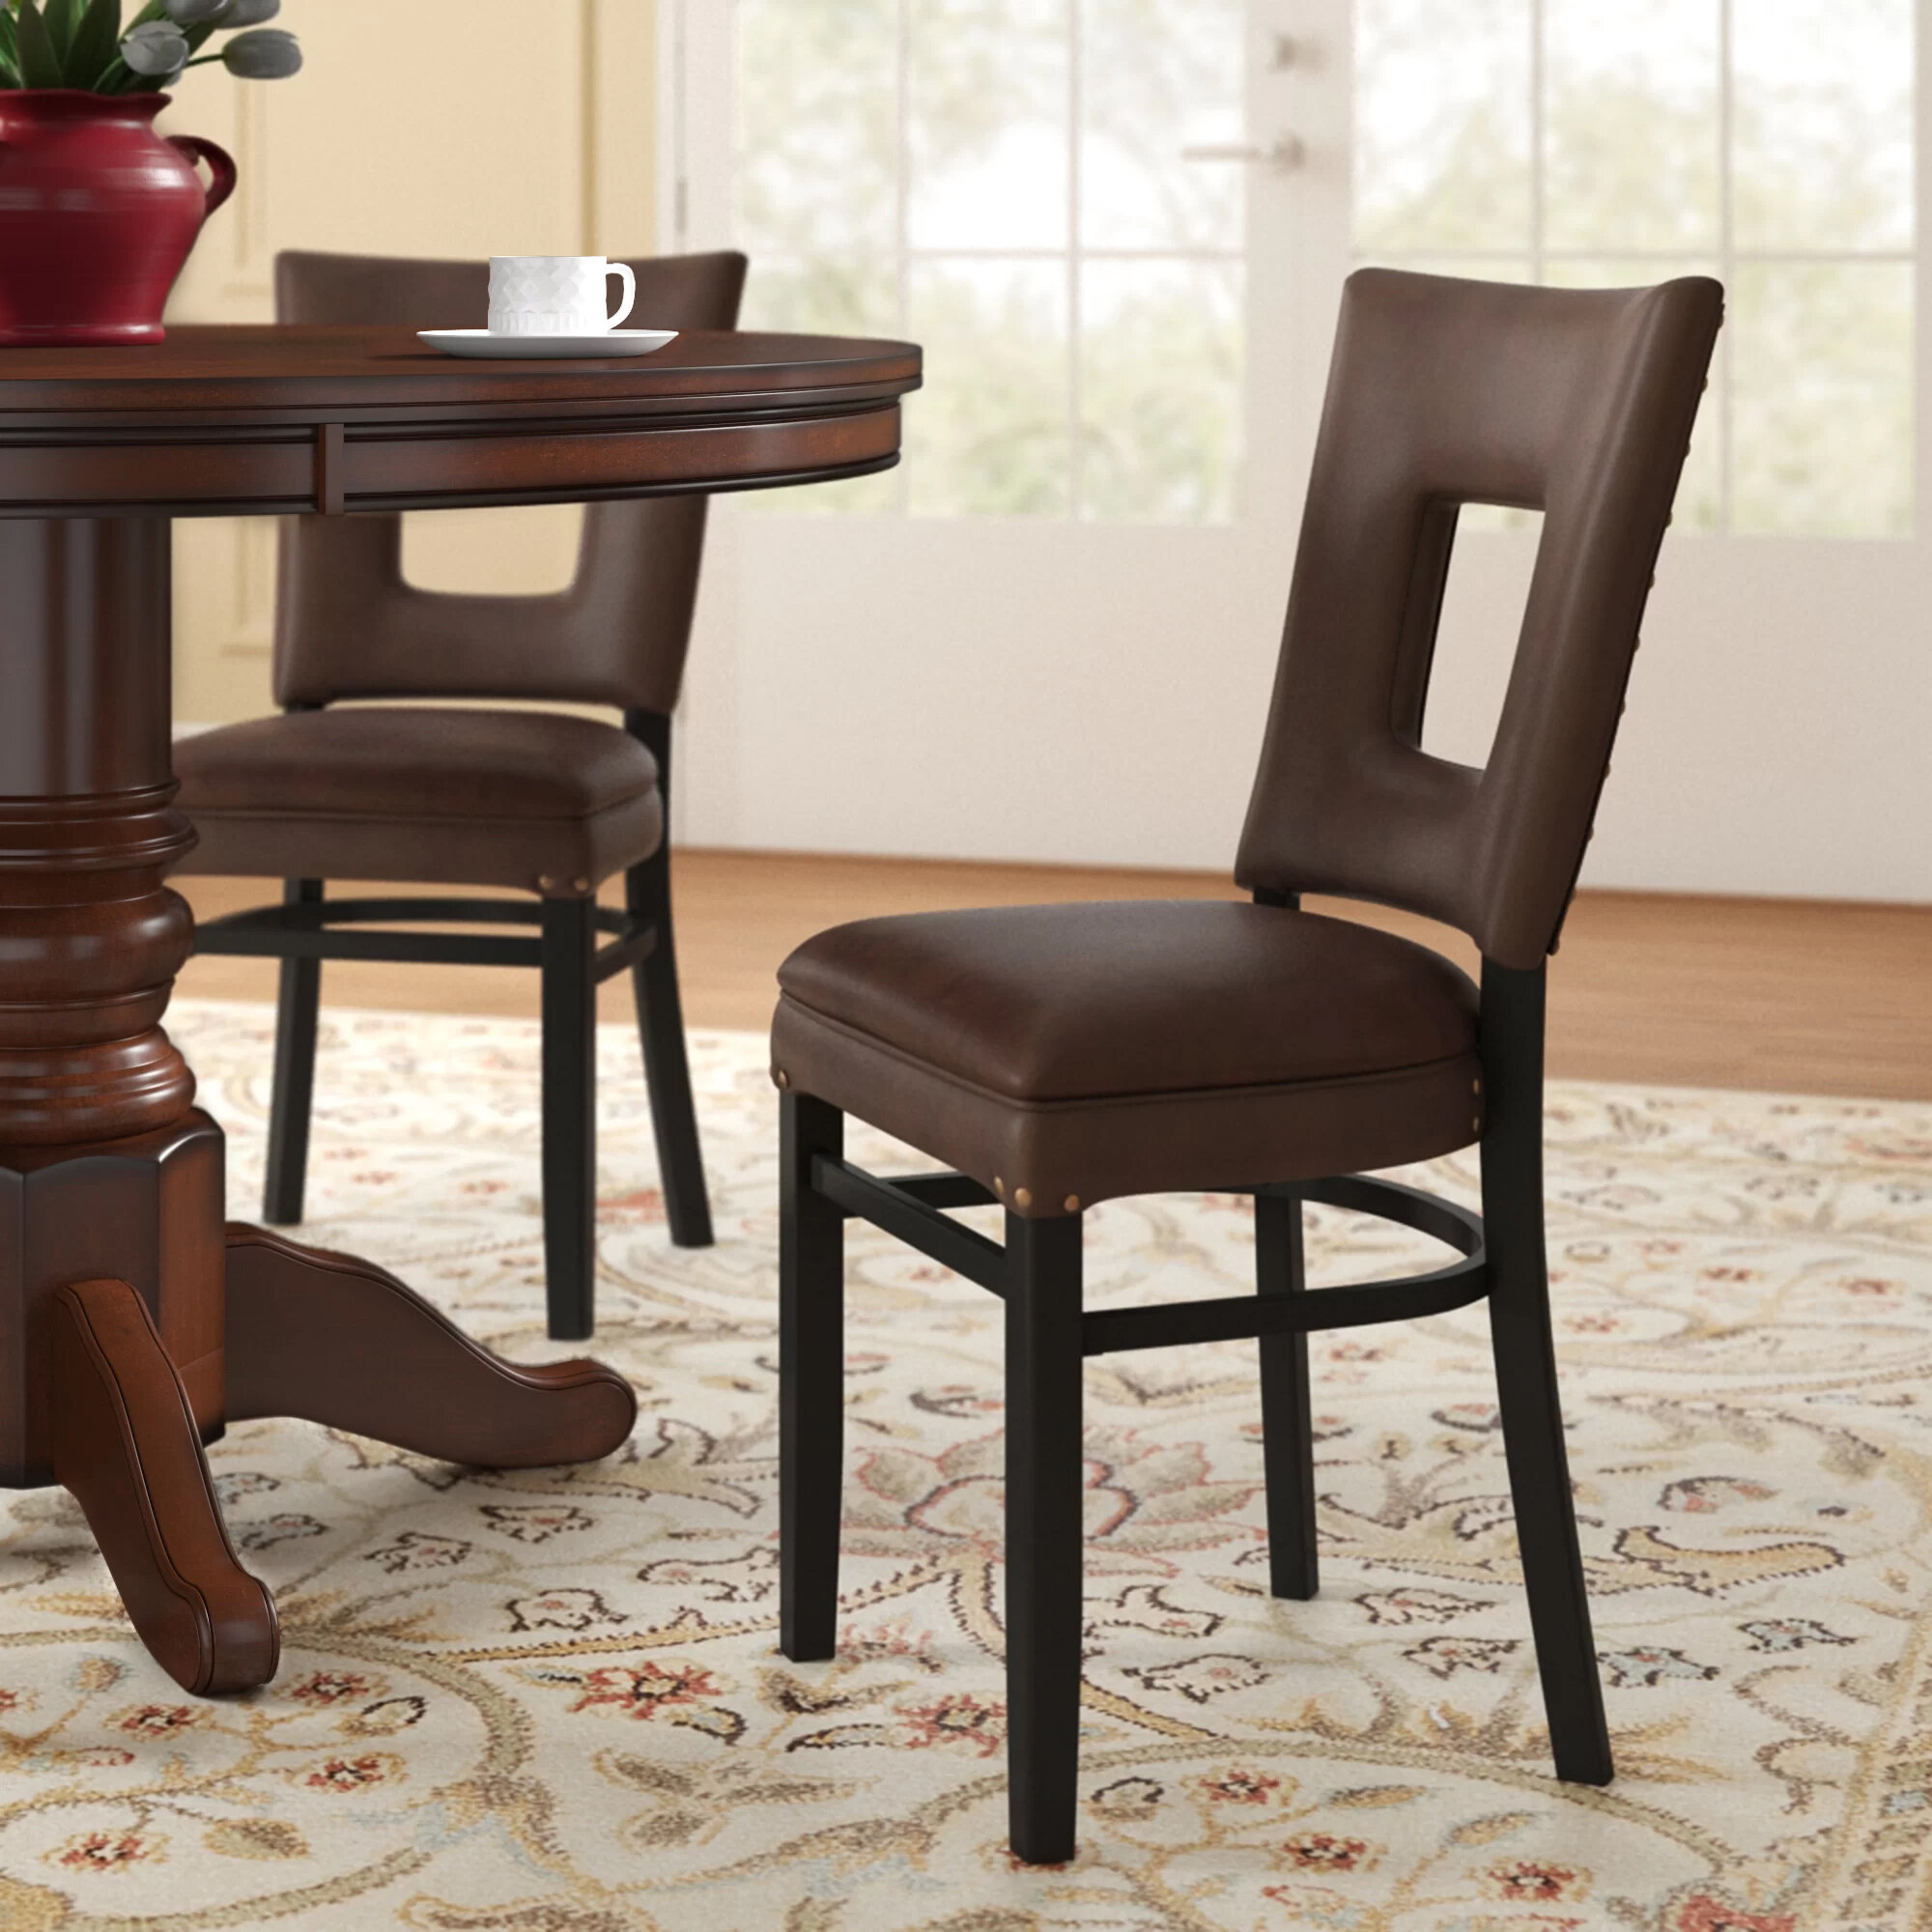 Dining Chairs Set of 4 Brown Velvet Upholstered Seat with Low Back Black Wood Legs Wingback Kitchen Chairs Living Room Side Chairs Occasional Chairs for Lounge Bedroom with Button Trimmed